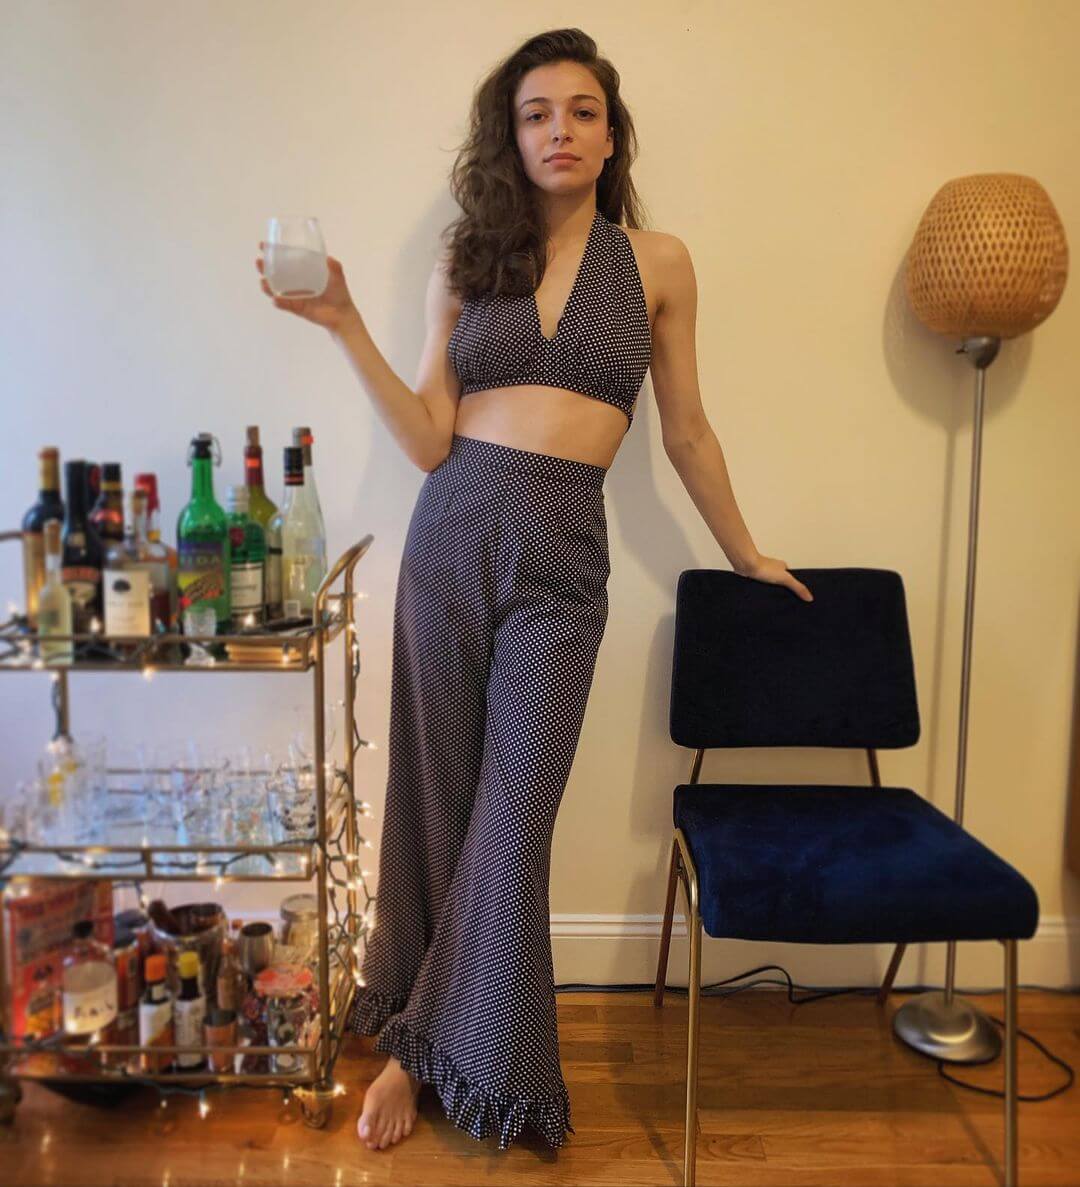 Ariane Chose To Wear Beautiful Crop Paired With Pants On Her Birthday